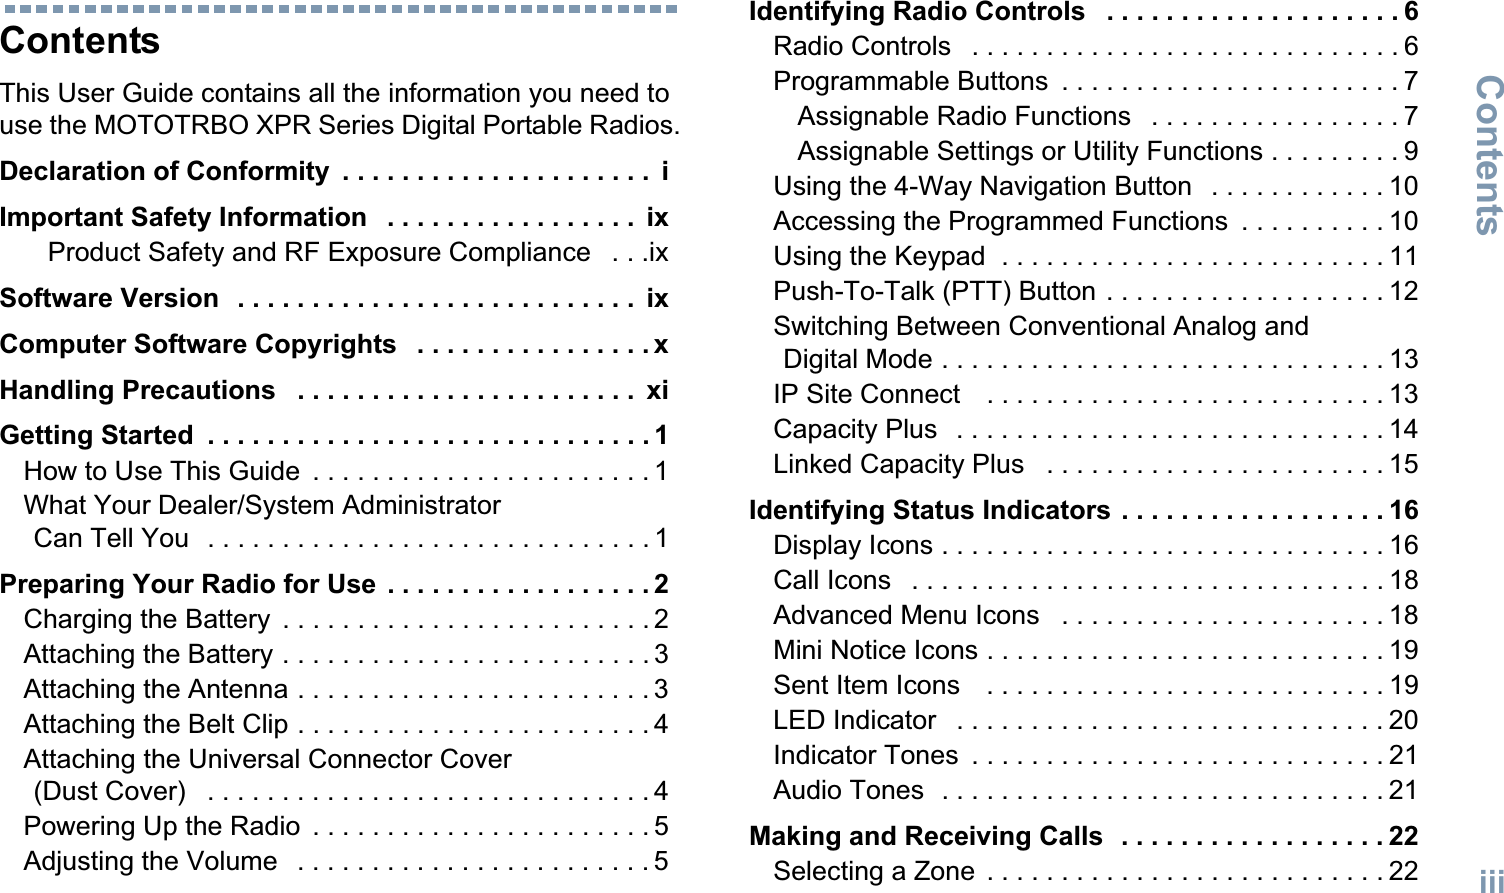 ContentsEnglishiiiContentsThis User Guide contains all the information you need to use the MOTOTRBO XPR Series Digital Portable Radios.Declaration of Conformity  . . . . . . . . . . . . . . . . . . . . .  iImportant Safety Information   . . . . . . . . . . . . . . . . .  ixProduct Safety and RF Exposure Compliance   . . .ixSoftware Version   . . . . . . . . . . . . . . . . . . . . . . . . . . .  ixComputer Software Copyrights   . . . . . . . . . . . . . . . . xHandling Precautions   . . . . . . . . . . . . . . . . . . . . . . .  xiGetting Started  . . . . . . . . . . . . . . . . . . . . . . . . . . . . . . 1How to Use This Guide  . . . . . . . . . . . . . . . . . . . . . . . 1What Your Dealer/System Administrator Can Tell You   . . . . . . . . . . . . . . . . . . . . . . . . . . . . . . 1Preparing Your Radio for Use  . . . . . . . . . . . . . . . . . . 2Charging the Battery  . . . . . . . . . . . . . . . . . . . . . . . . . 2Attaching the Battery . . . . . . . . . . . . . . . . . . . . . . . . . 3Attaching the Antenna . . . . . . . . . . . . . . . . . . . . . . . . 3Attaching the Belt Clip . . . . . . . . . . . . . . . . . . . . . . . . 4Attaching the Universal Connector Cover (Dust Cover)   . . . . . . . . . . . . . . . . . . . . . . . . . . . . . . 4Powering Up the Radio  . . . . . . . . . . . . . . . . . . . . . . . 5Adjusting the Volume   . . . . . . . . . . . . . . . . . . . . . . . . 5Identifying Radio Controls   . . . . . . . . . . . . . . . . . . . . 6Radio Controls   . . . . . . . . . . . . . . . . . . . . . . . . . . . . . 6Programmable Buttons  . . . . . . . . . . . . . . . . . . . . . . . 7Assignable Radio Functions   . . . . . . . . . . . . . . . . . 7Assignable Settings or Utility Functions . . . . . . . . . 9Using the 4-Way Navigation Button   . . . . . . . . . . . . 10Accessing the Programmed Functions  . . . . . . . . . . 10Using the Keypad  . . . . . . . . . . . . . . . . . . . . . . . . . . 11Push-To-Talk (PTT) Button . . . . . . . . . . . . . . . . . . . 12Switching Between Conventional Analog and Digital Mode . . . . . . . . . . . . . . . . . . . . . . . . . . . . . . 13IP Site Connect    . . . . . . . . . . . . . . . . . . . . . . . . . . . 13Capacity Plus   . . . . . . . . . . . . . . . . . . . . . . . . . . . . . 14Linked Capacity Plus   . . . . . . . . . . . . . . . . . . . . . . . 15Identifying Status Indicators . . . . . . . . . . . . . . . . . . 16Display Icons . . . . . . . . . . . . . . . . . . . . . . . . . . . . . . 16Call Icons   . . . . . . . . . . . . . . . . . . . . . . . . . . . . . . . . 18Advanced Menu Icons   . . . . . . . . . . . . . . . . . . . . . . 18Mini Notice Icons . . . . . . . . . . . . . . . . . . . . . . . . . . . 19Sent Item Icons    . . . . . . . . . . . . . . . . . . . . . . . . . . . 19LED Indicator   . . . . . . . . . . . . . . . . . . . . . . . . . . . . . 20Indicator Tones  . . . . . . . . . . . . . . . . . . . . . . . . . . . . 21Audio Tones  . . . . . . . . . . . . . . . . . . . . . . . . . . . . . . 21Making and Receiving Calls  . . . . . . . . . . . . . . . . . . 22Selecting a Zone  . . . . . . . . . . . . . . . . . . . . . . . . . . . 22